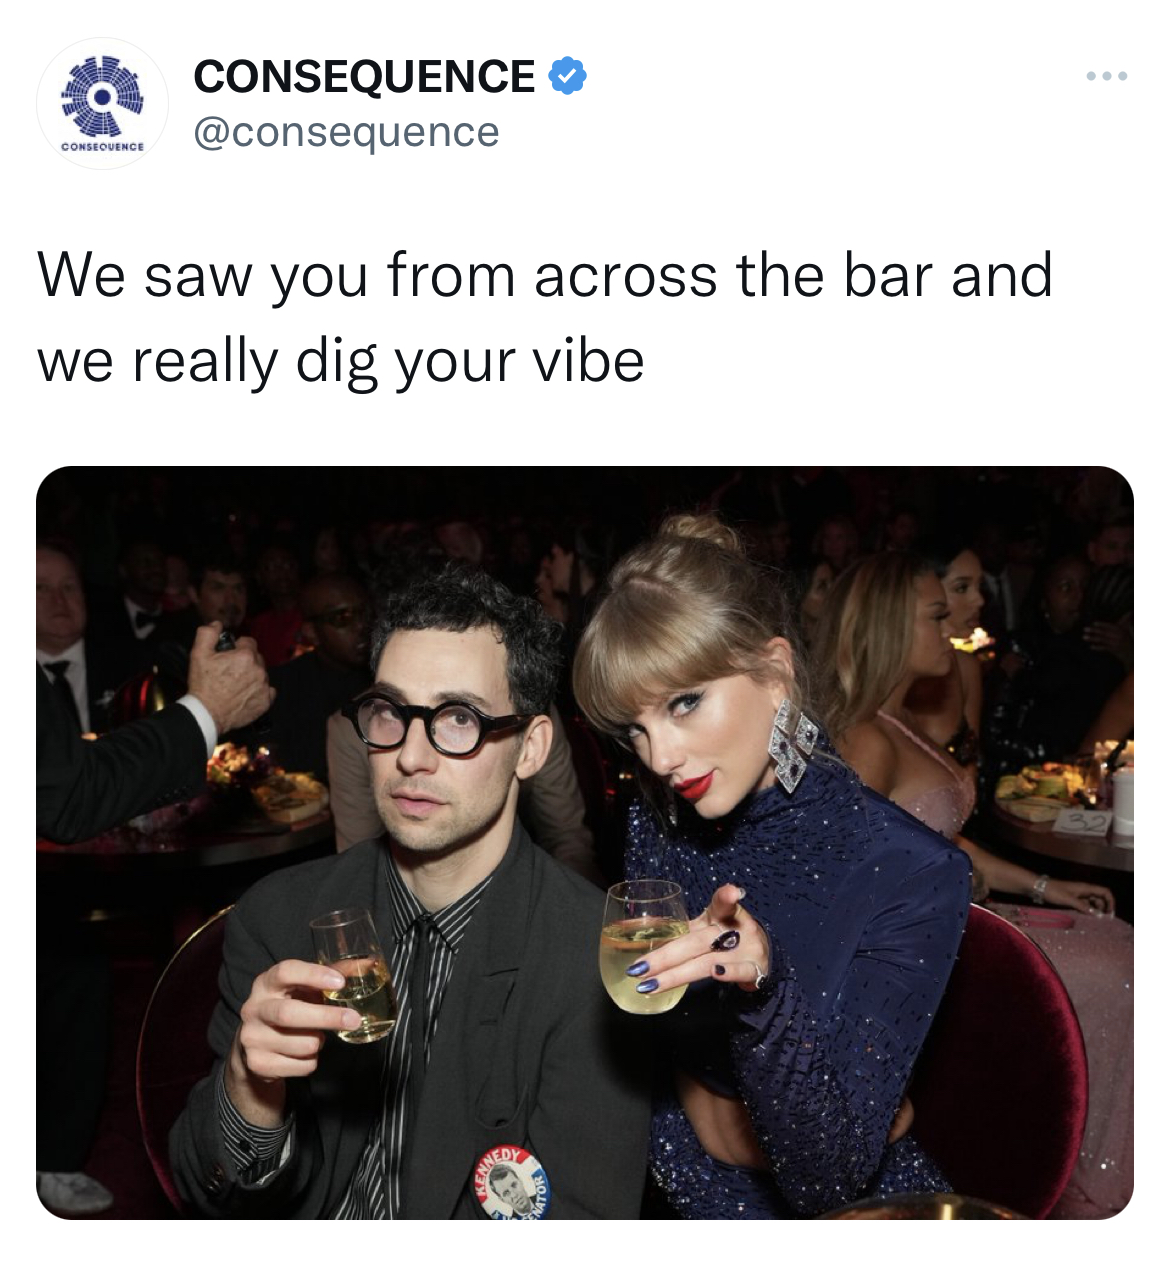 swinger memes across the bar - 65th Annual Grammy Award - Comence Consequence We saw you from across the bar and we really dig your vibe